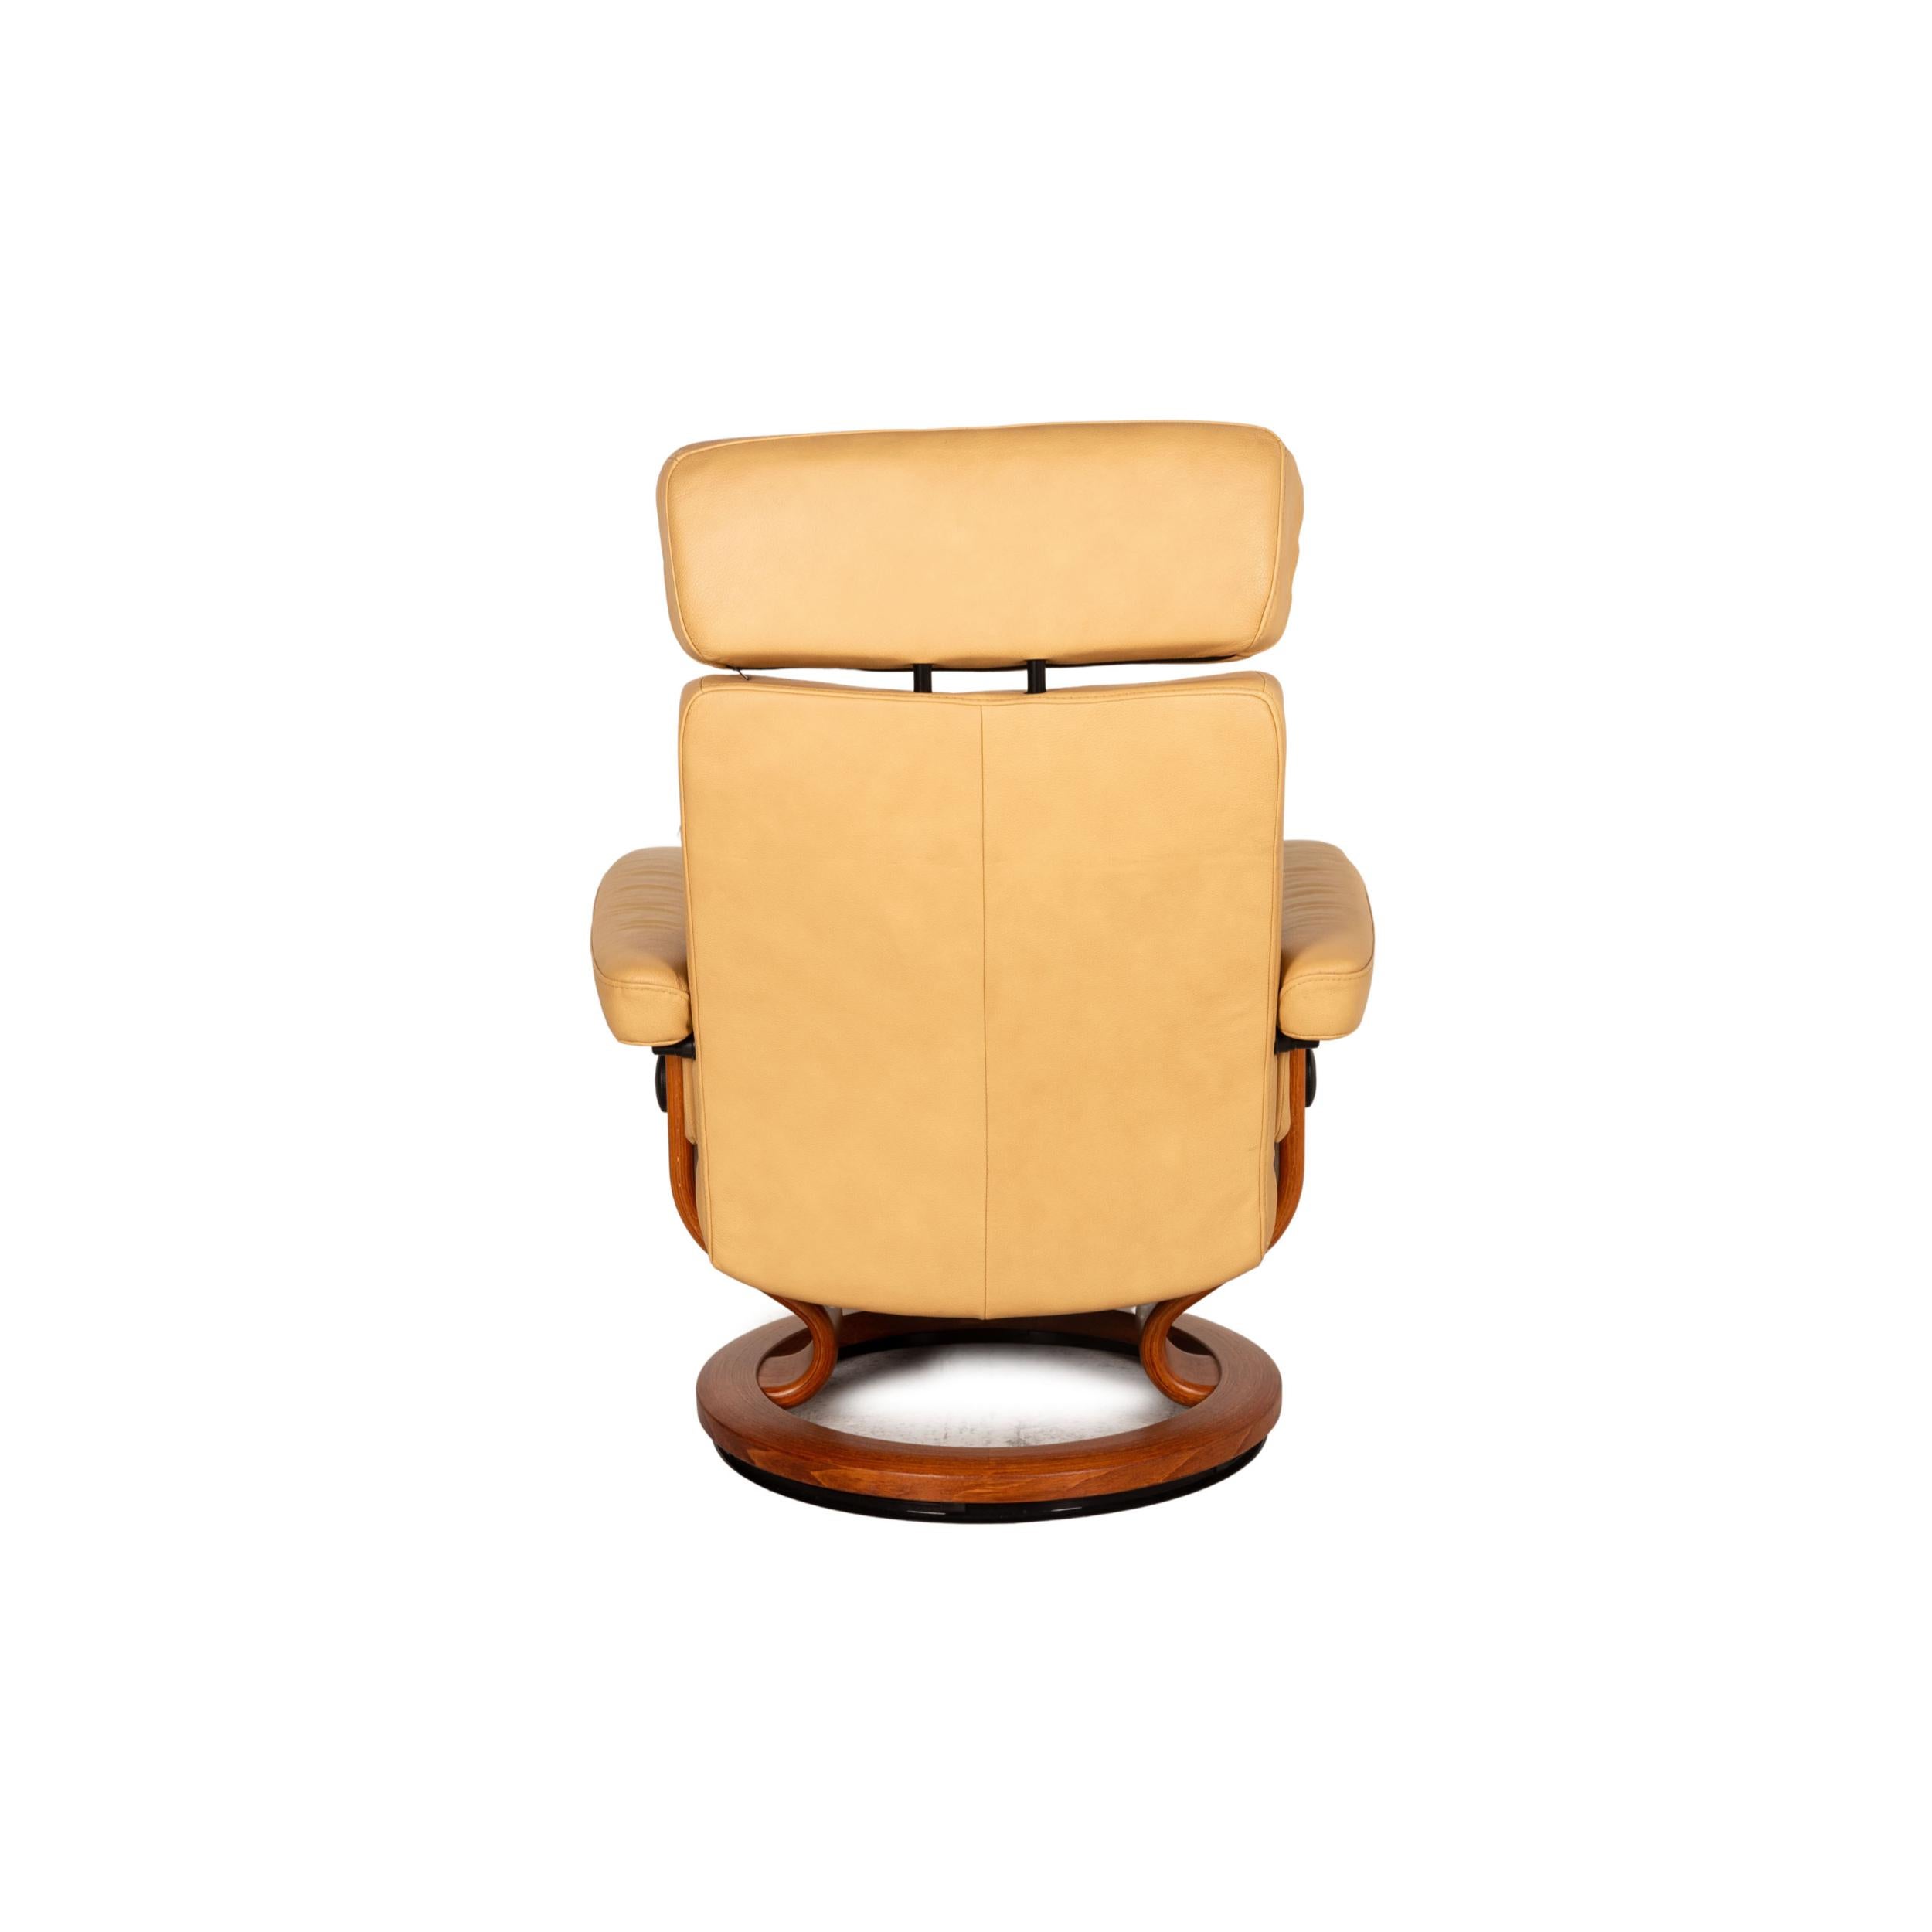 Stressless Orion Leather Armchair Beige Incl. Stool Function Relaxation Function For Sale 3